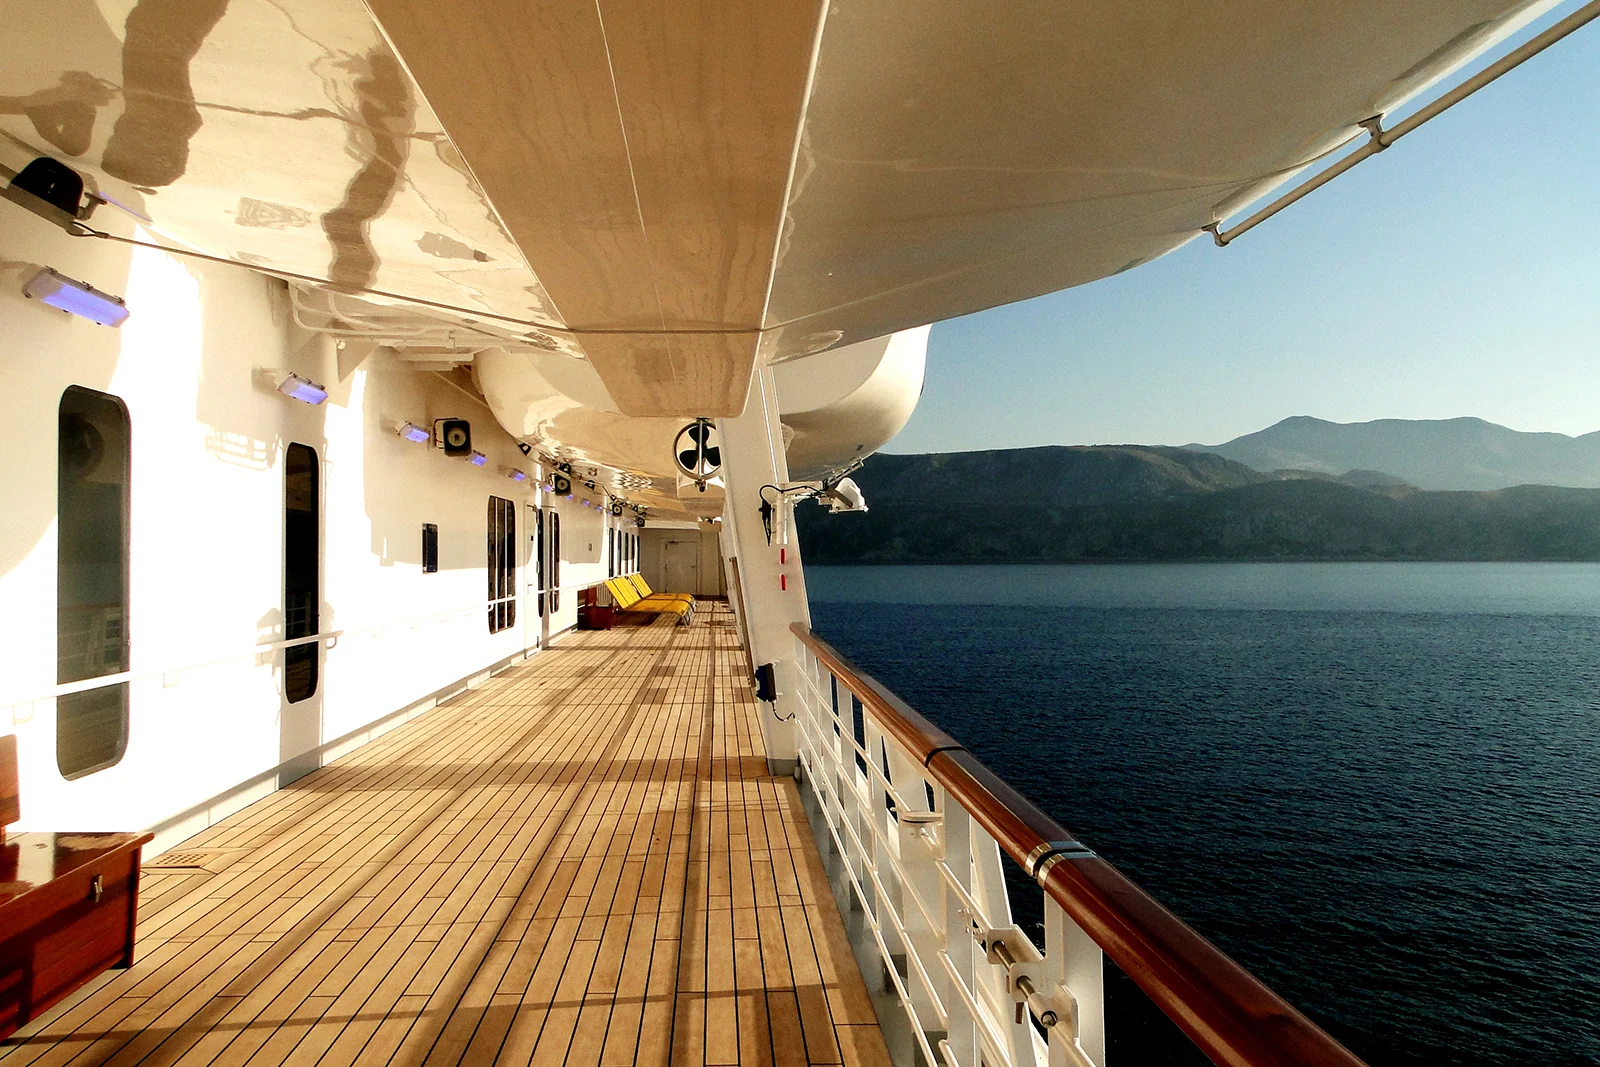 11 items you must never purchase when on a cruise (or in port)